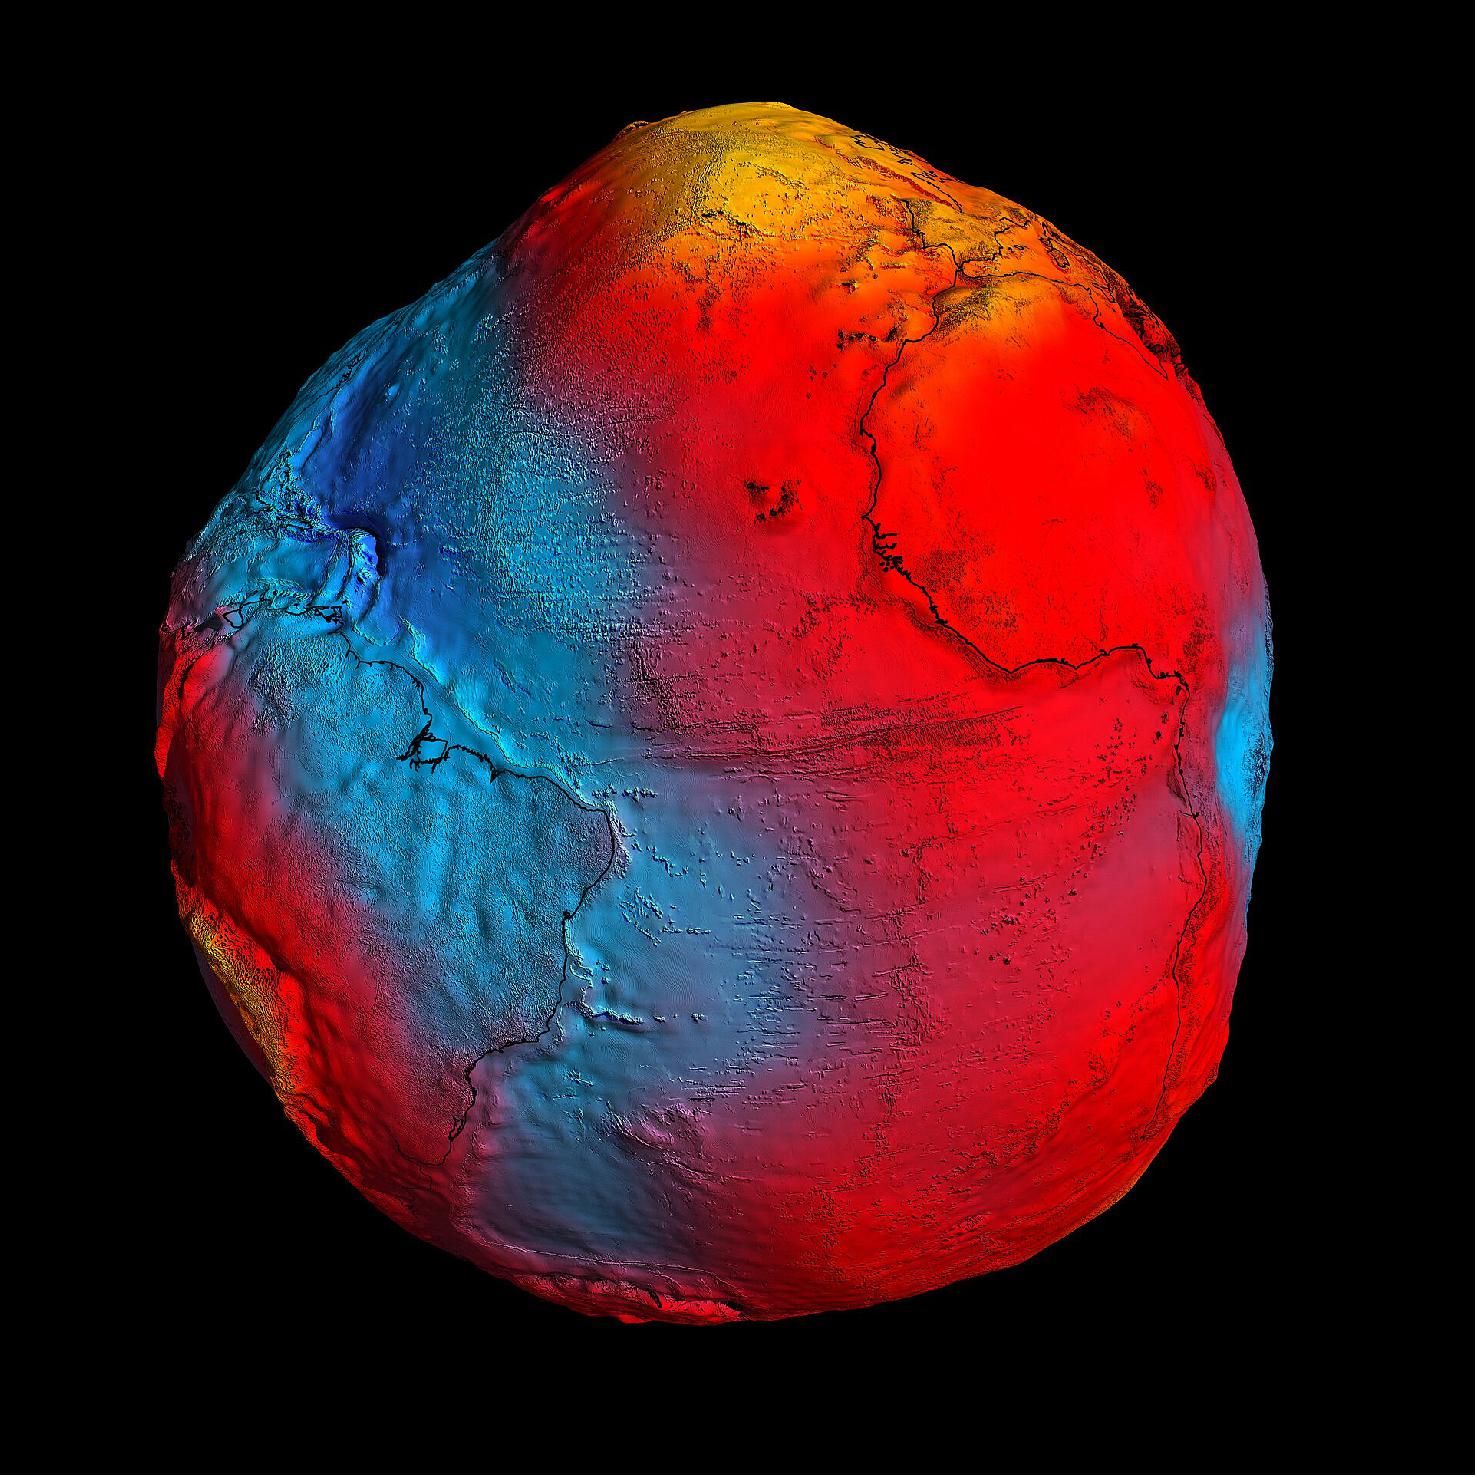 Figure 20: New GOCE geoid. The colours in the image represent deviations in height (–100 m to +100 m) from an ideal geoid. The blue shades represent low values and the reds/yellows represent high values. A precise model of Earth's geoid is crucial for deriving accurate measurements of ocean circulation, sea-level change and terrestrial ice dynamics. The geoid is also used as a reference surface from which to map the topographical features on the planet. In addition, a better understanding of variations in the gravity field will lead to a deeper understanding of Earth's interior, such as the physics and dynamics associated with volcanic activity and earthquakes (image credit: ESA/HPF/DLR)